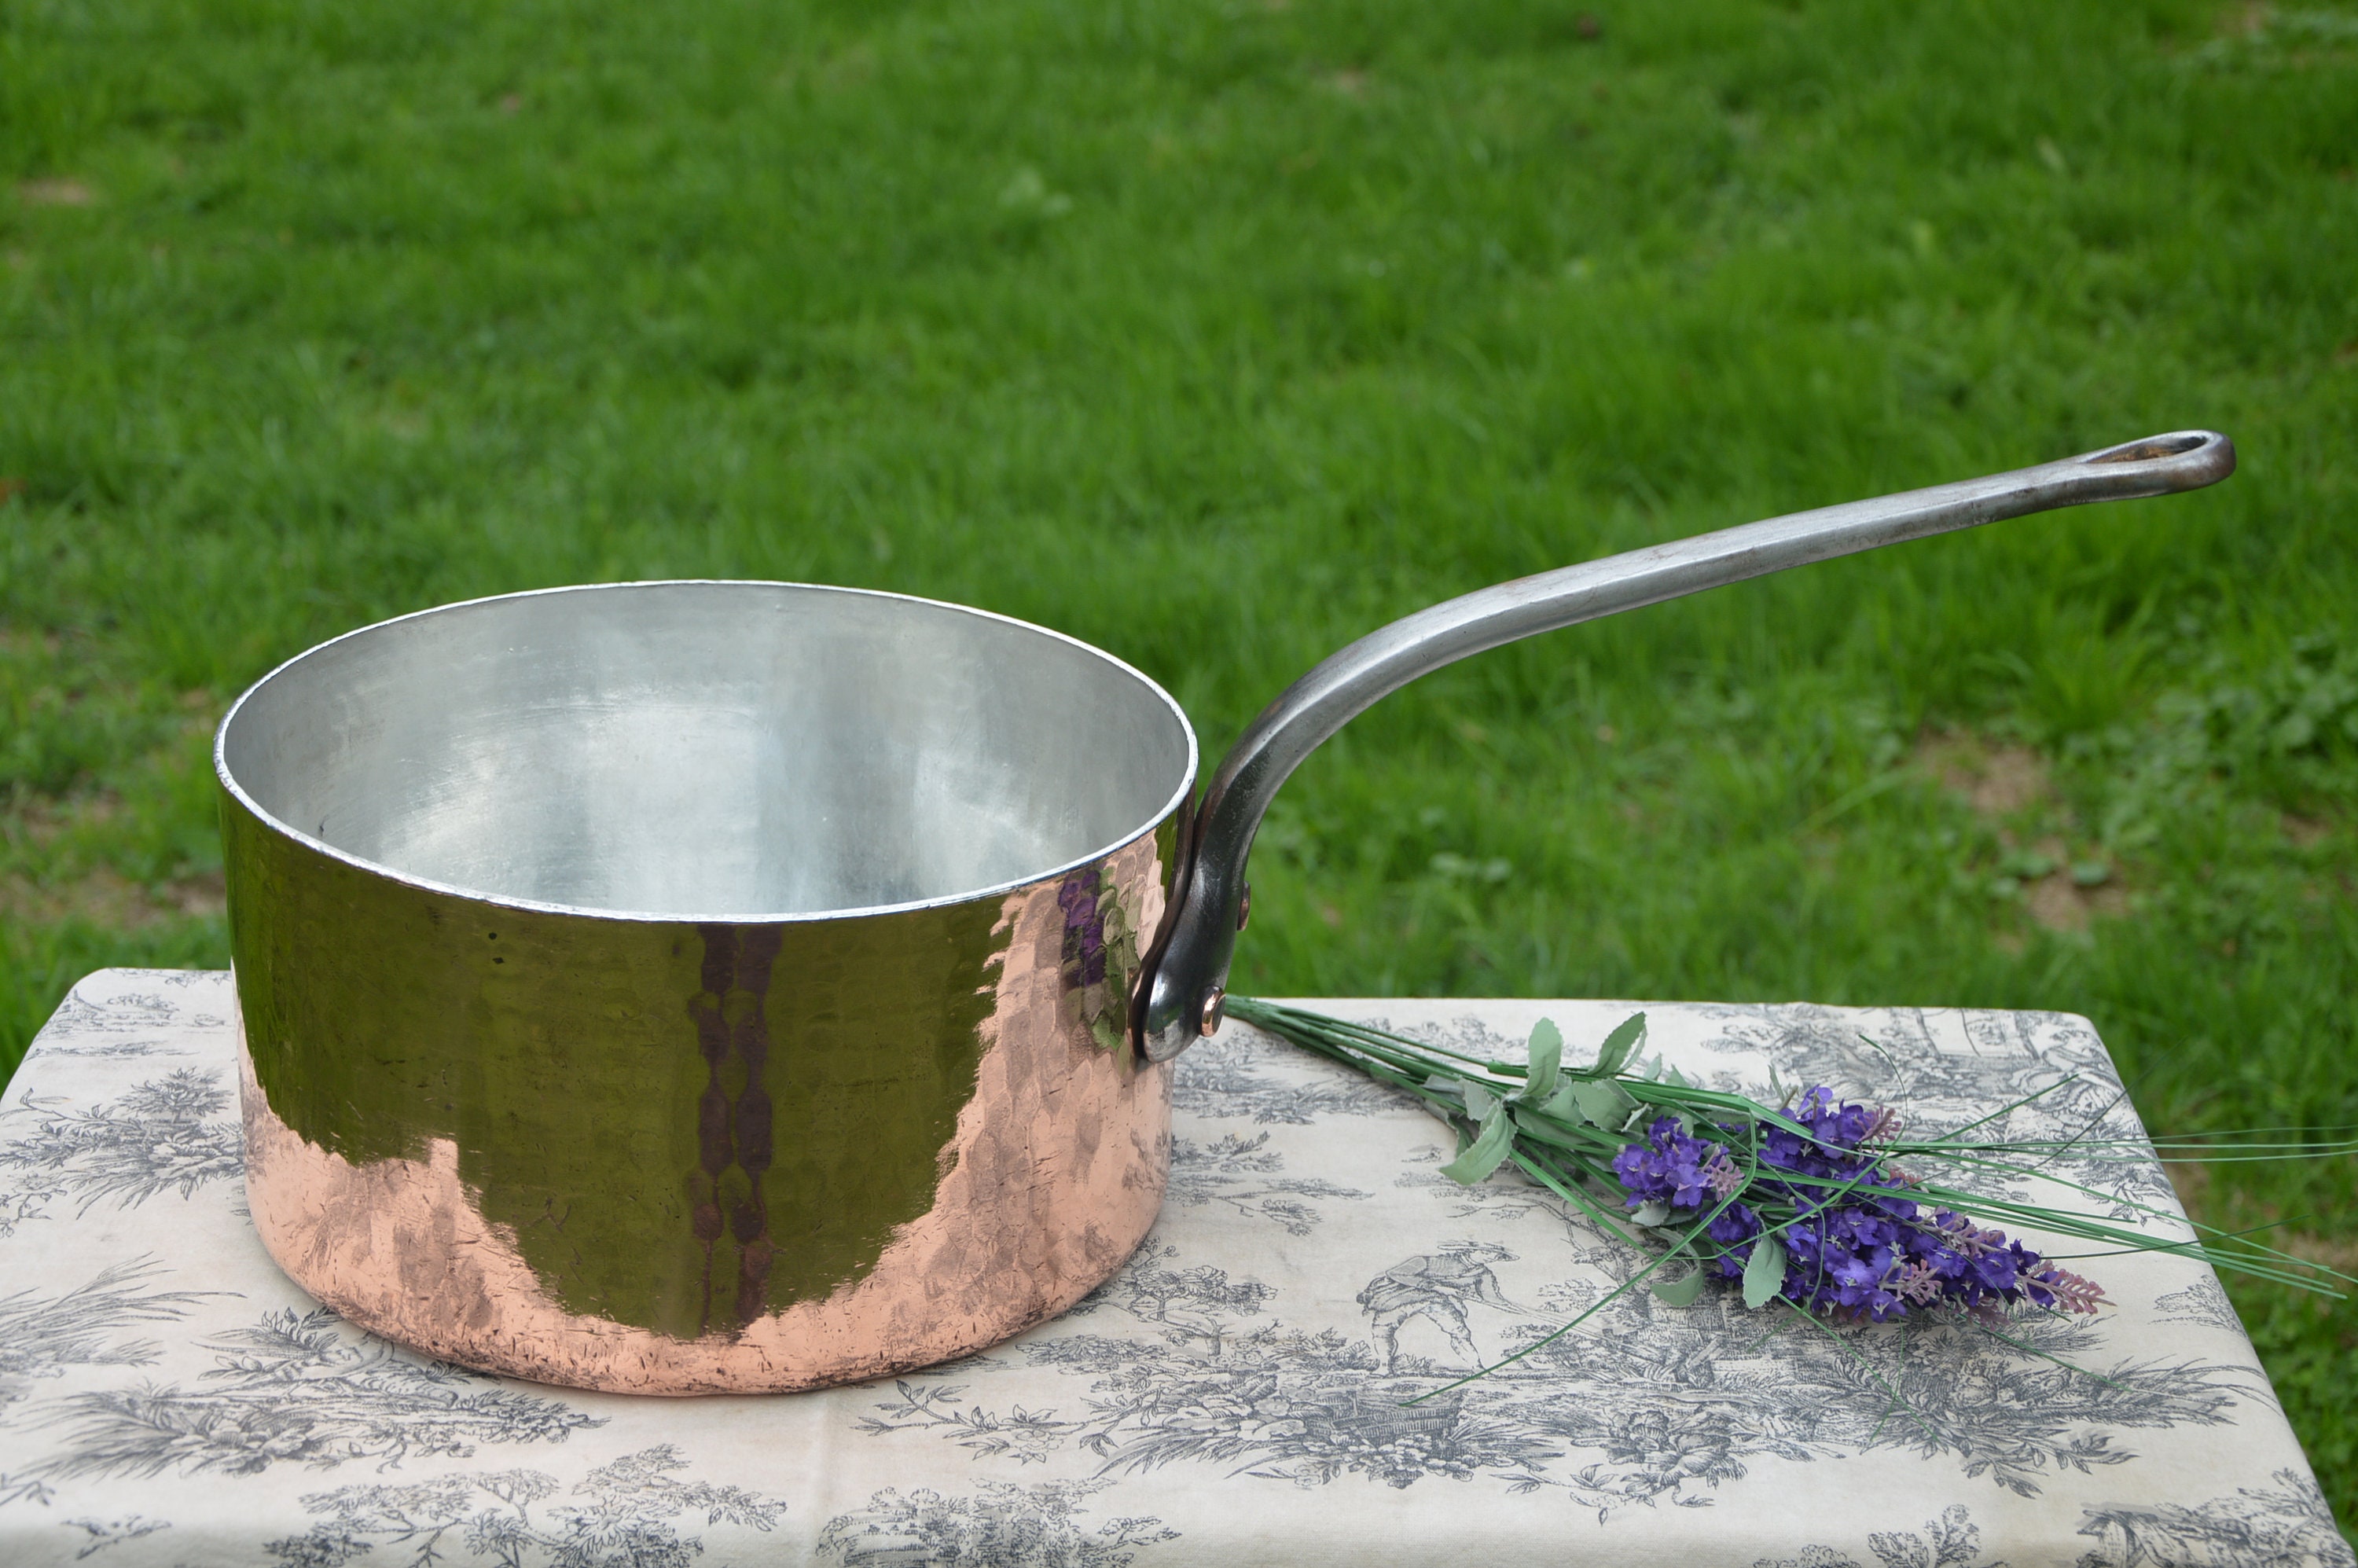 New NKC Copper 28cm Rondeau 28 cm 11 Big NKC Saute Two Handle Casserole  Cuivre Traditionally Made Tin lined New Normandy Kitchen Copper